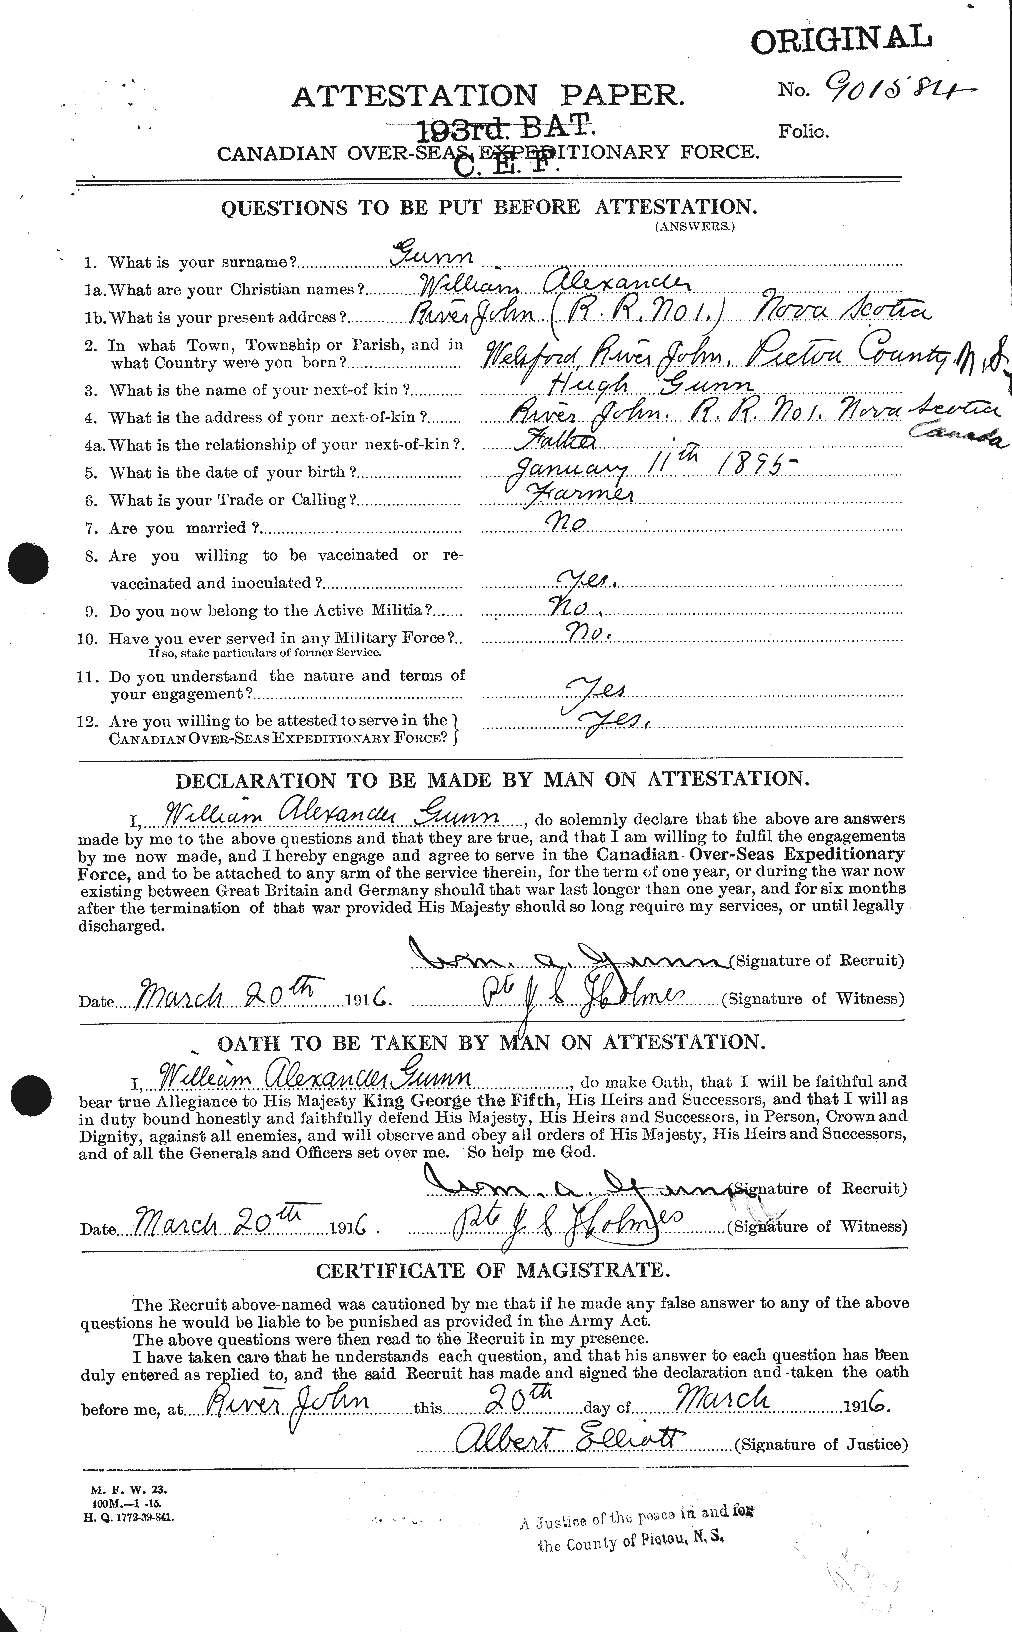 Personnel Records of the First World War - CEF 369361a